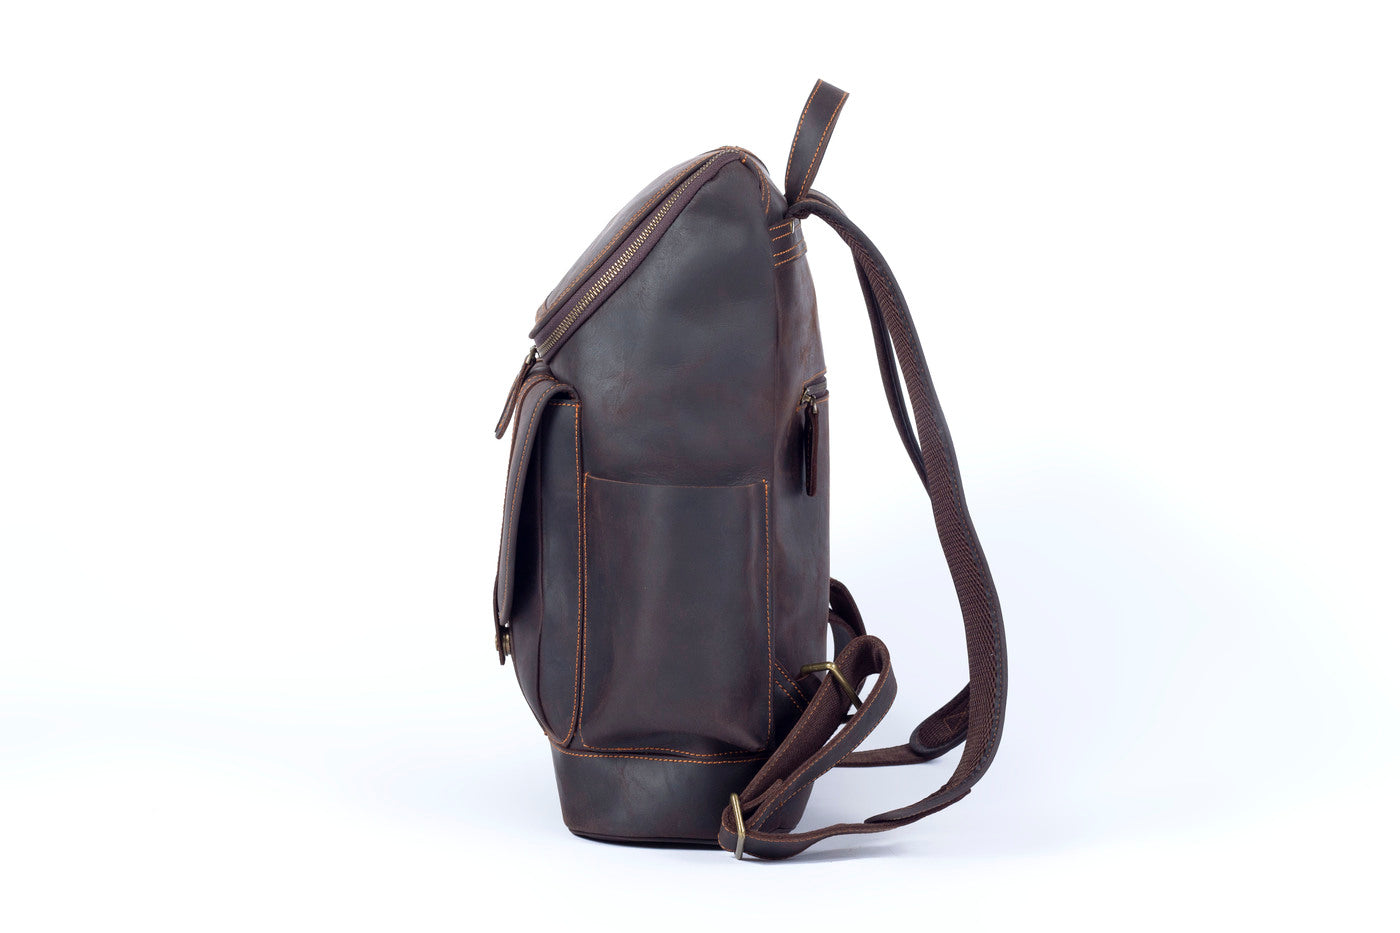 mens classic leather backpack for work with zipped pockets to securely transport a wallet, a coin purse, a card holder or sunglasses